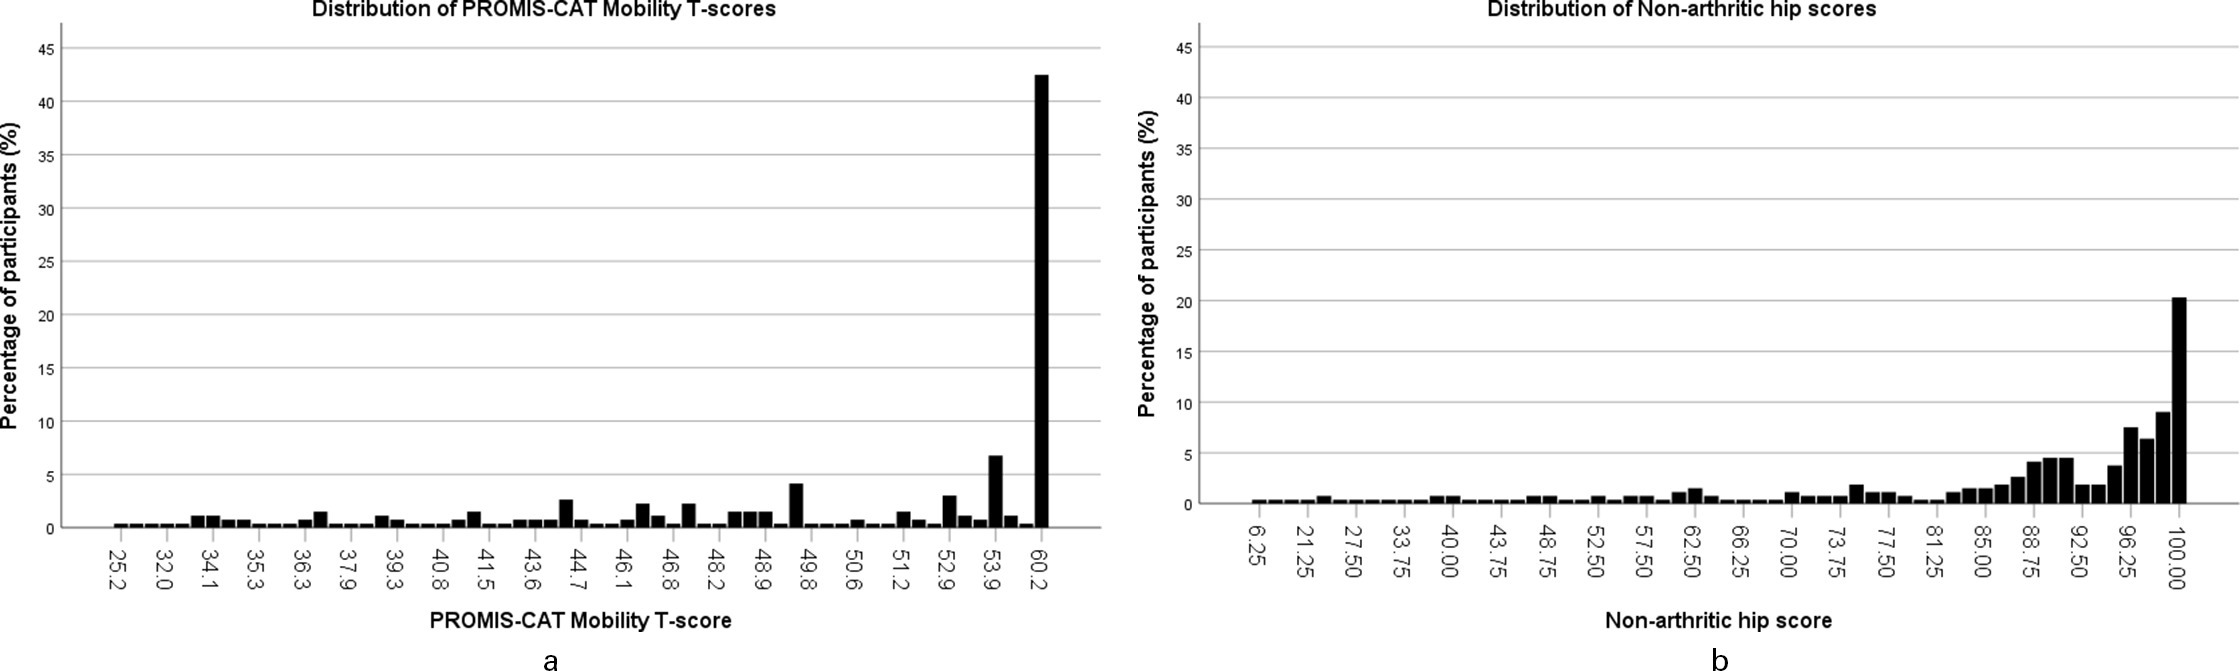 Fig. 3 
          a) Histogram showing the score distribution of Patient-Reported Outcomes Measurement Information System computer adaptive test (PROMIS-CAT) Mobility T-scores. b) Histogram showing the score distribution of Non-Arthritic Hip Score.
        